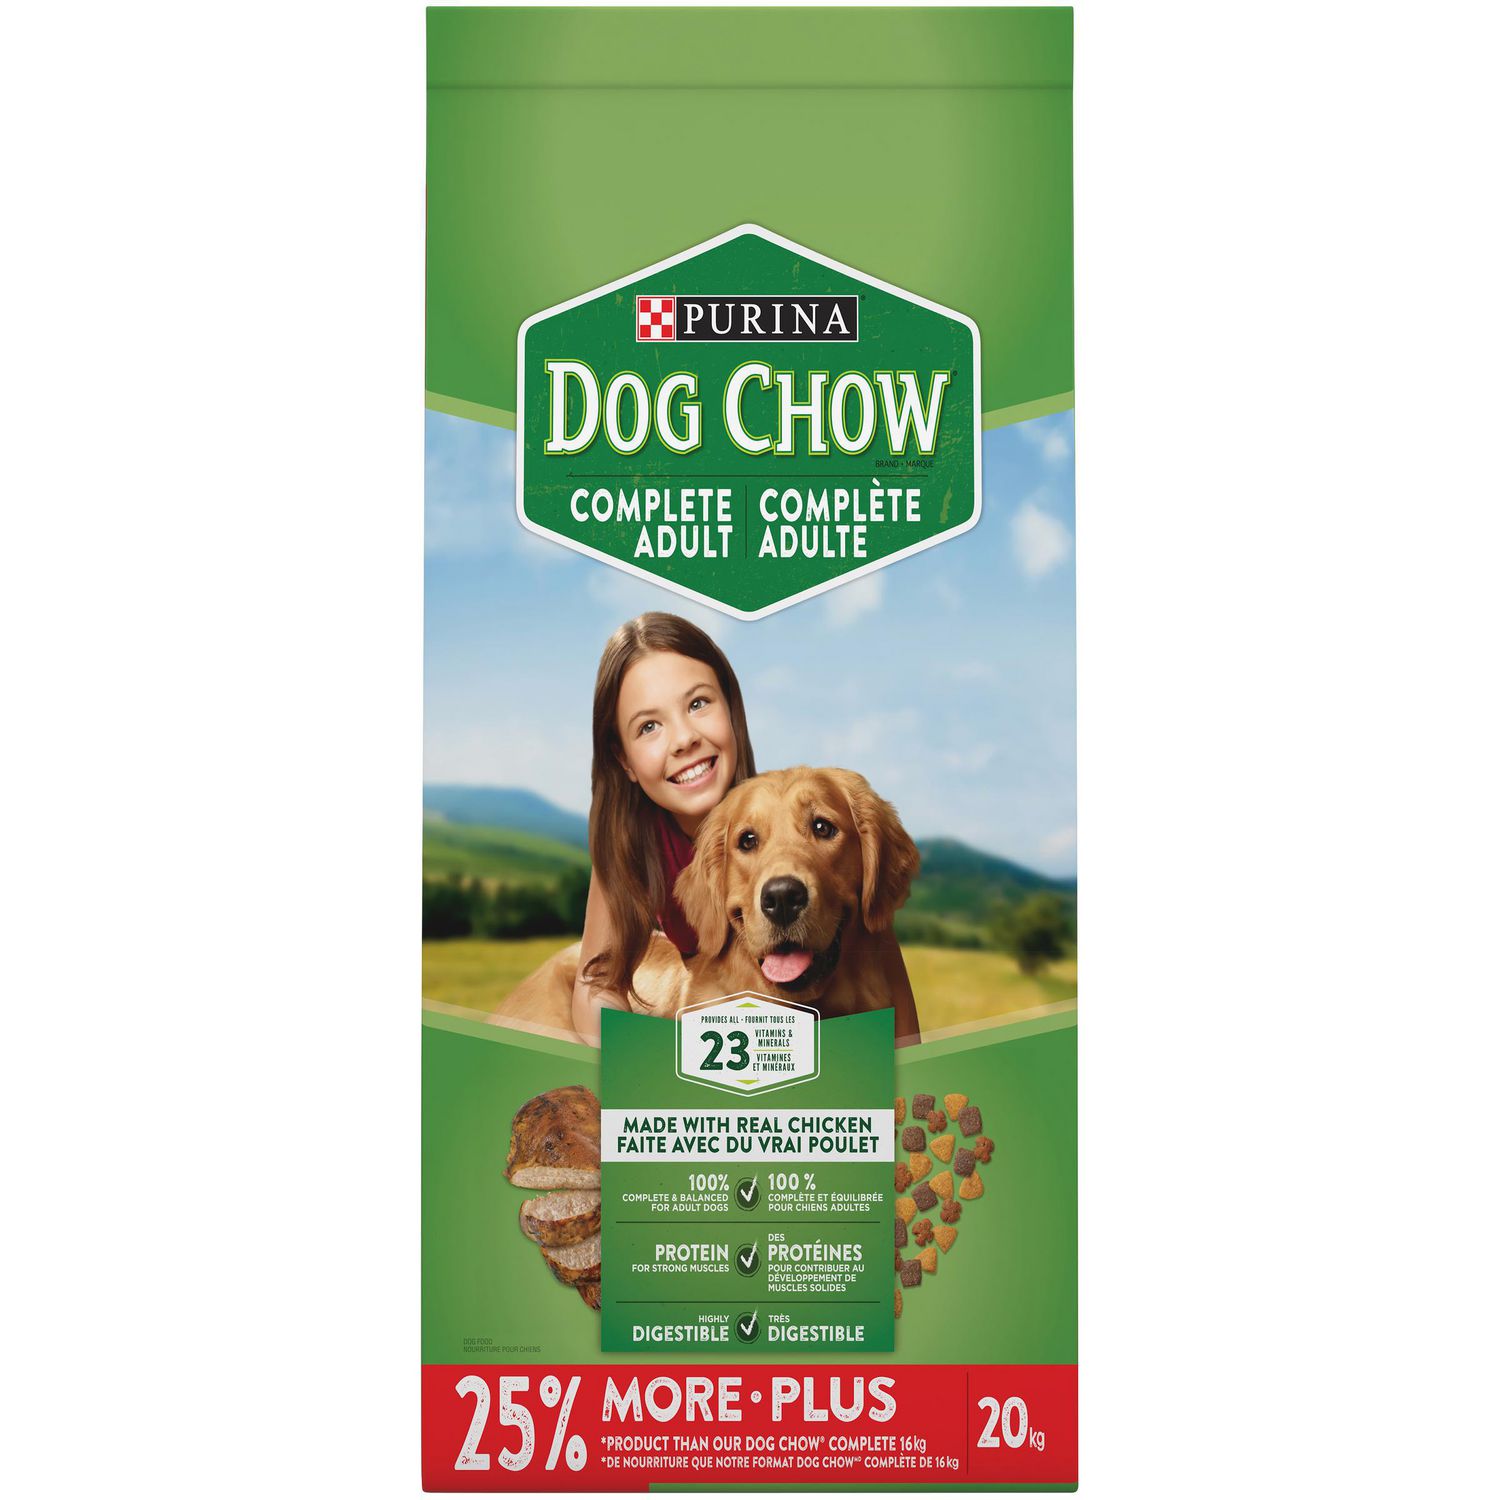 dog chow complete adult